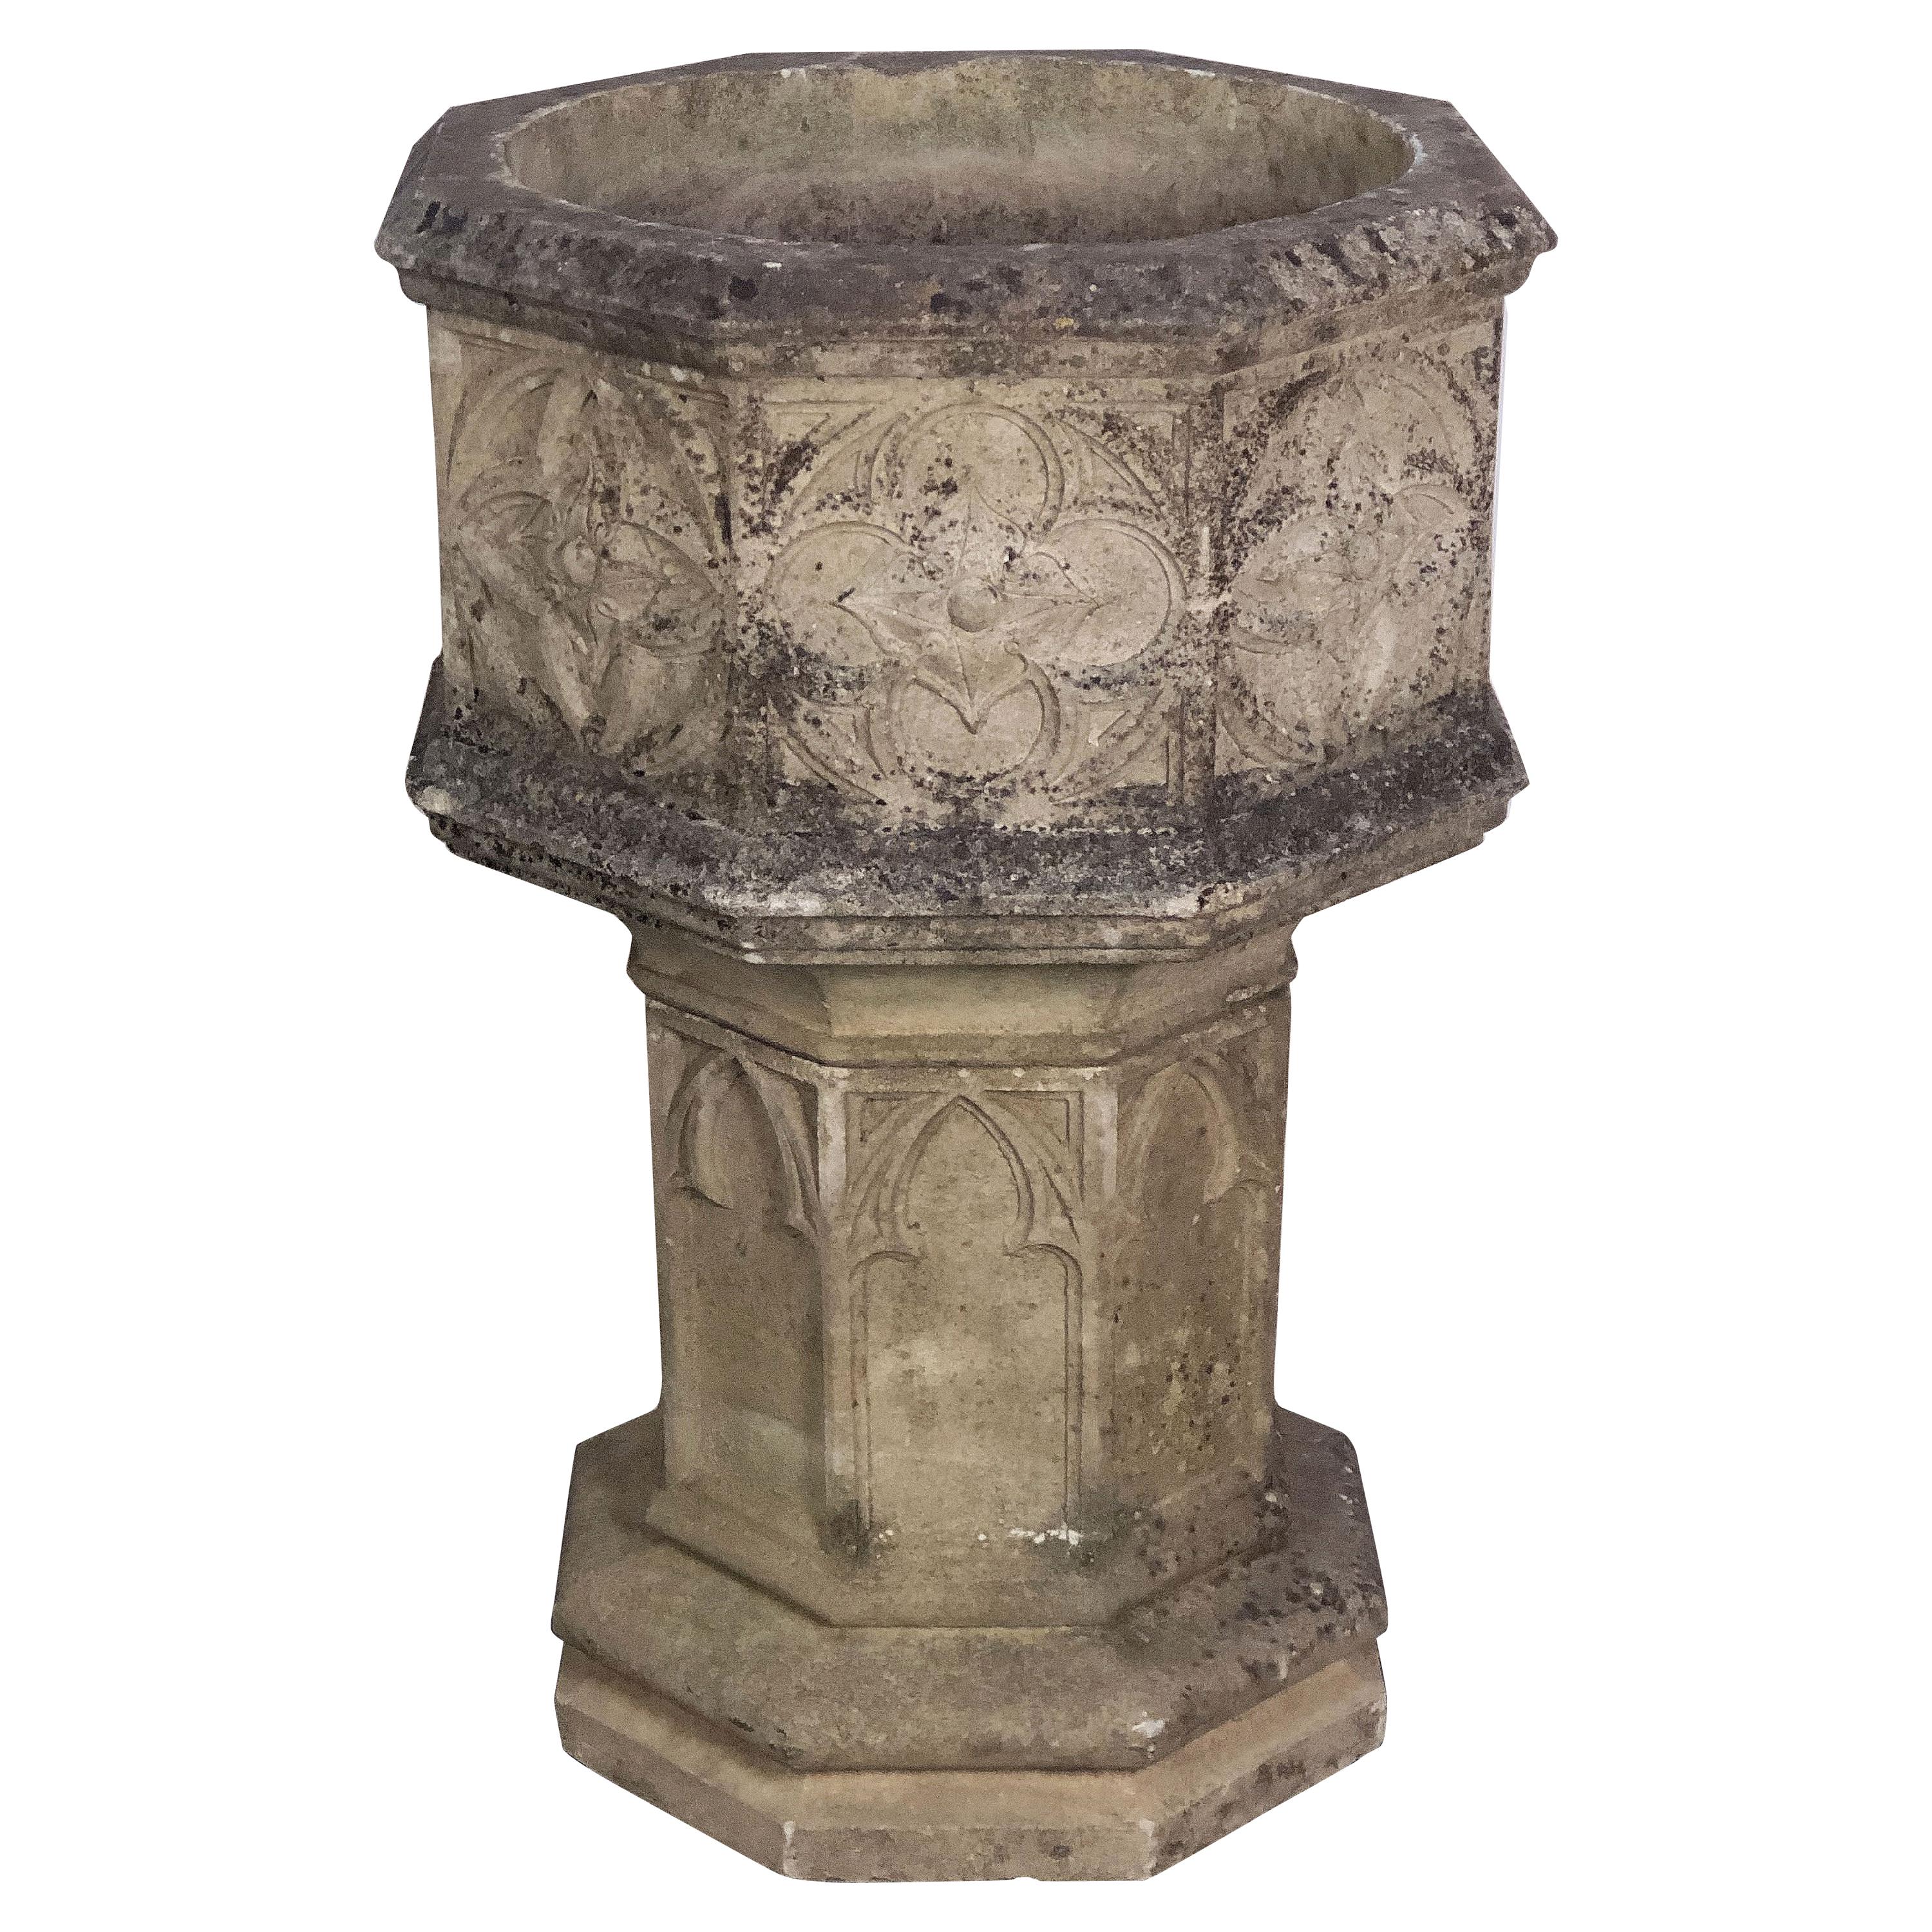 English Garden Stone Octagonal Planter on Pedestal Stand in the Gothic Style